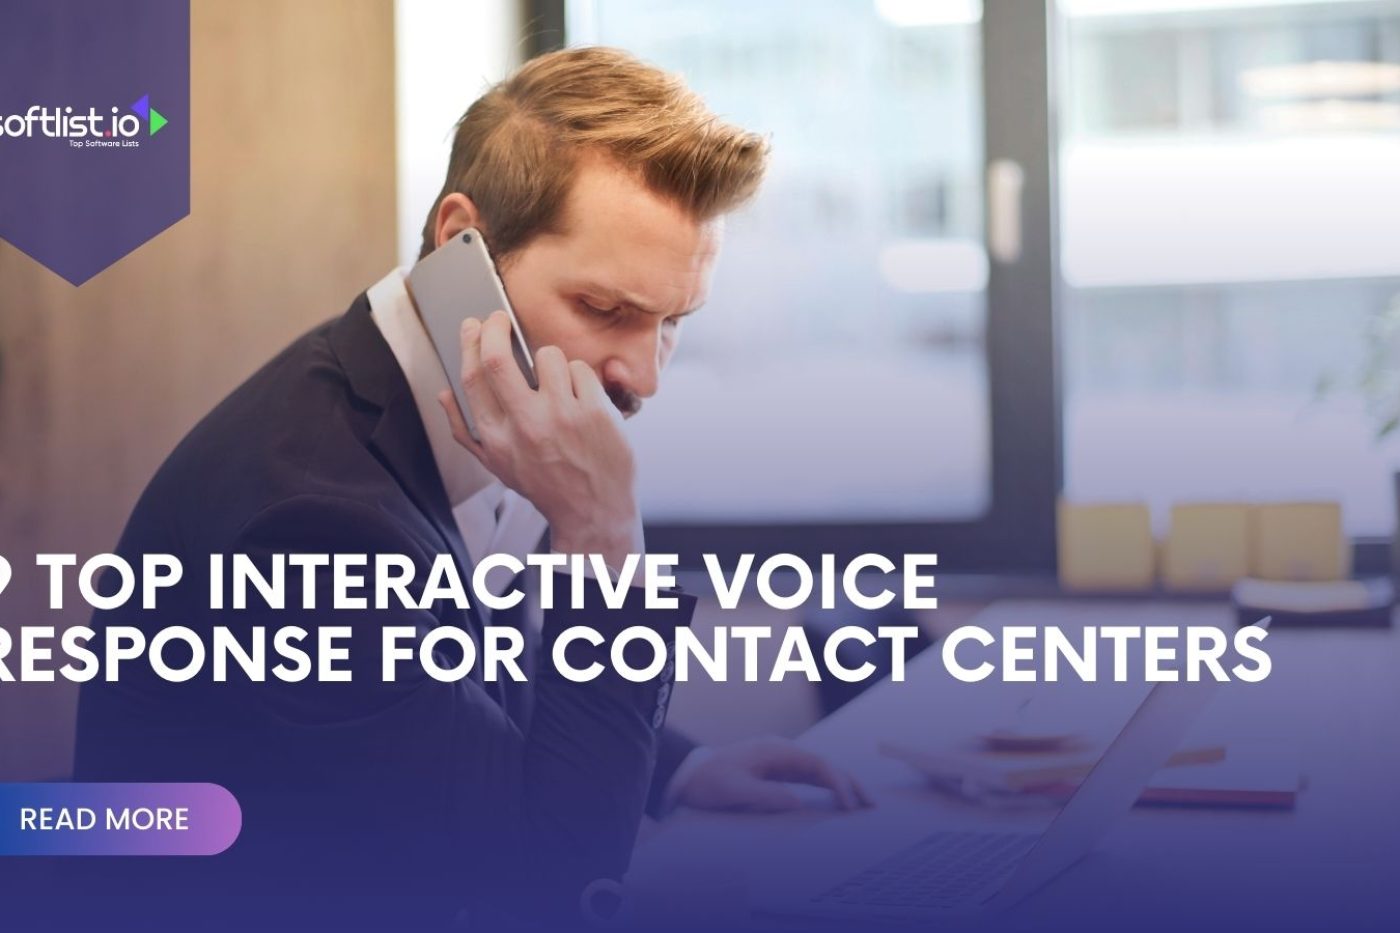 Top Interactive Voice Response for Contact Centers